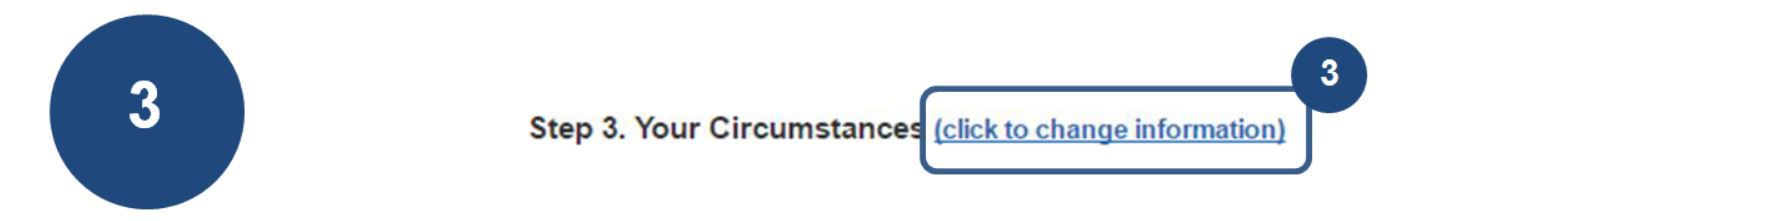 3. To edit your form, select the click to change information link at each step (Step 3 Your Circumstances).